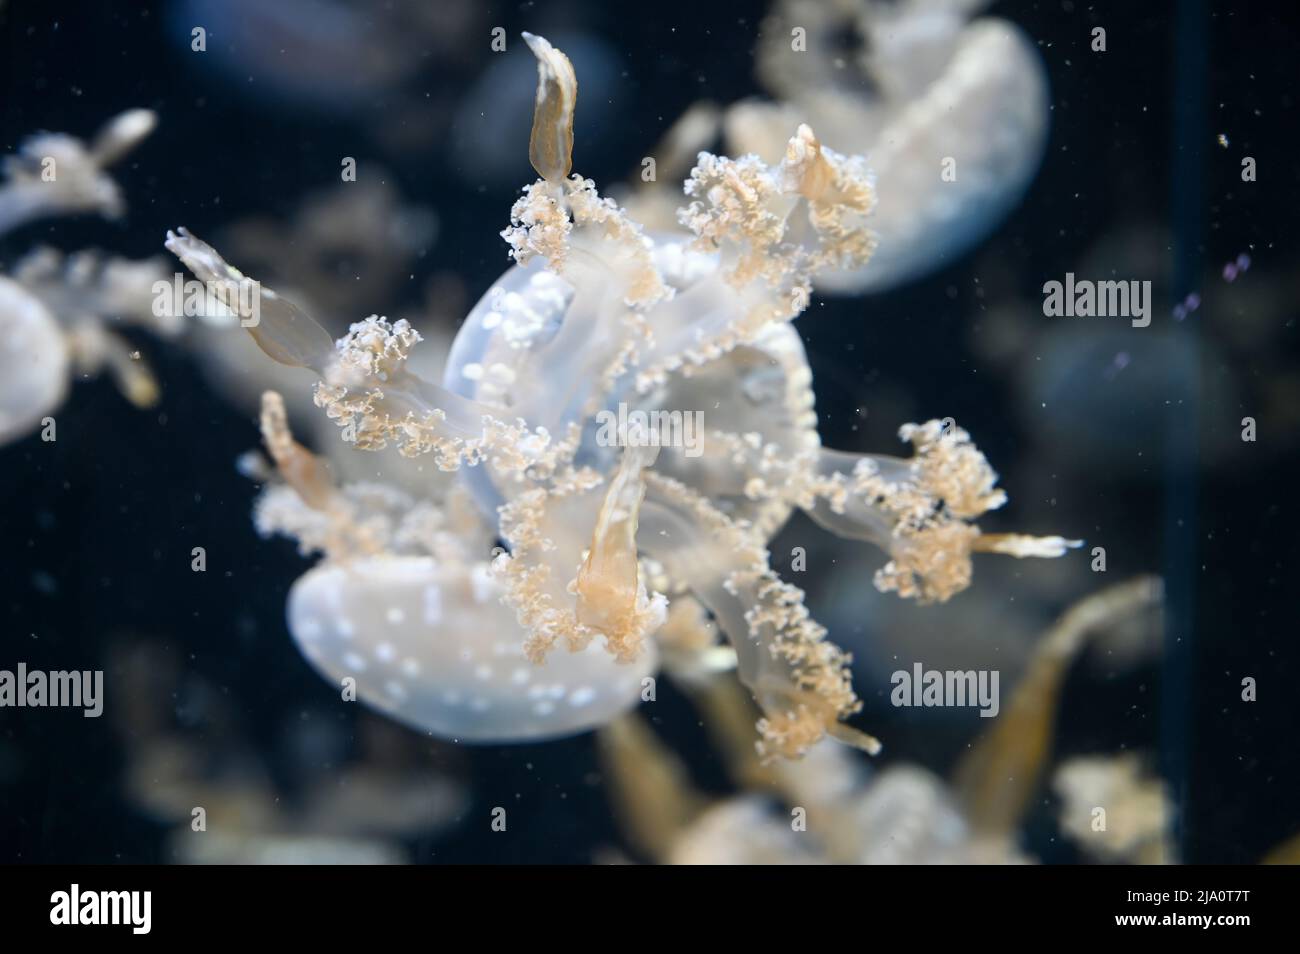 White spotted jellyfish also known as Phyllorhiza punctata, floating bell, Australian spotted jellyfish, brown jellyfish or the white-spotted jellyfis Stock Photo